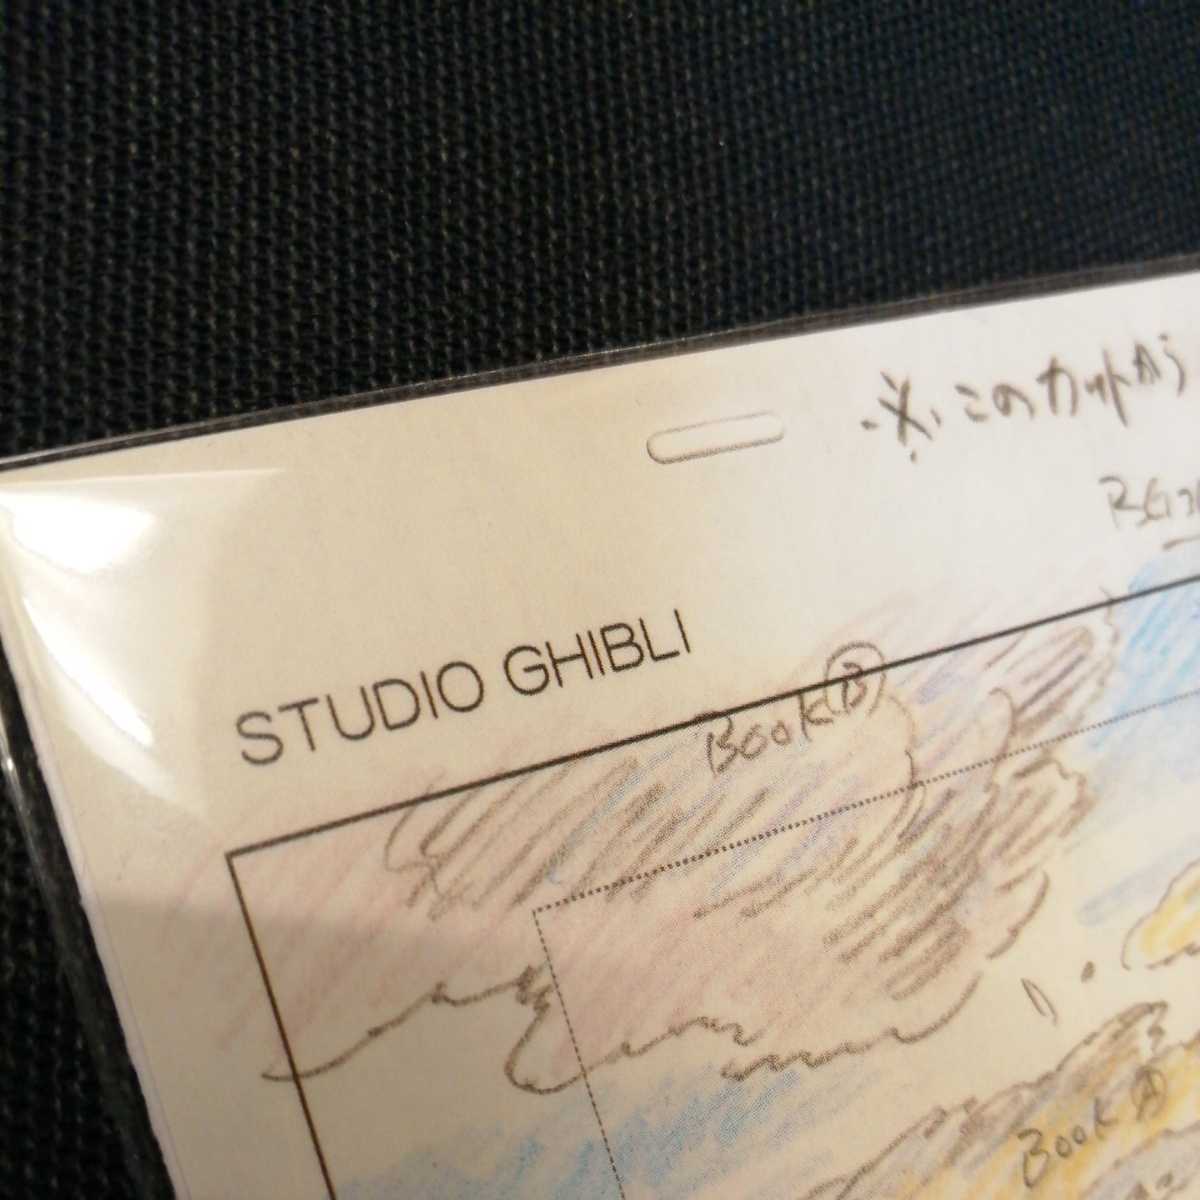  Studio Ghibli .. on. ponyo layout cut . inspection ) Ghibli postcard poster original picture cell picture layout exhibition Miyazaki .g